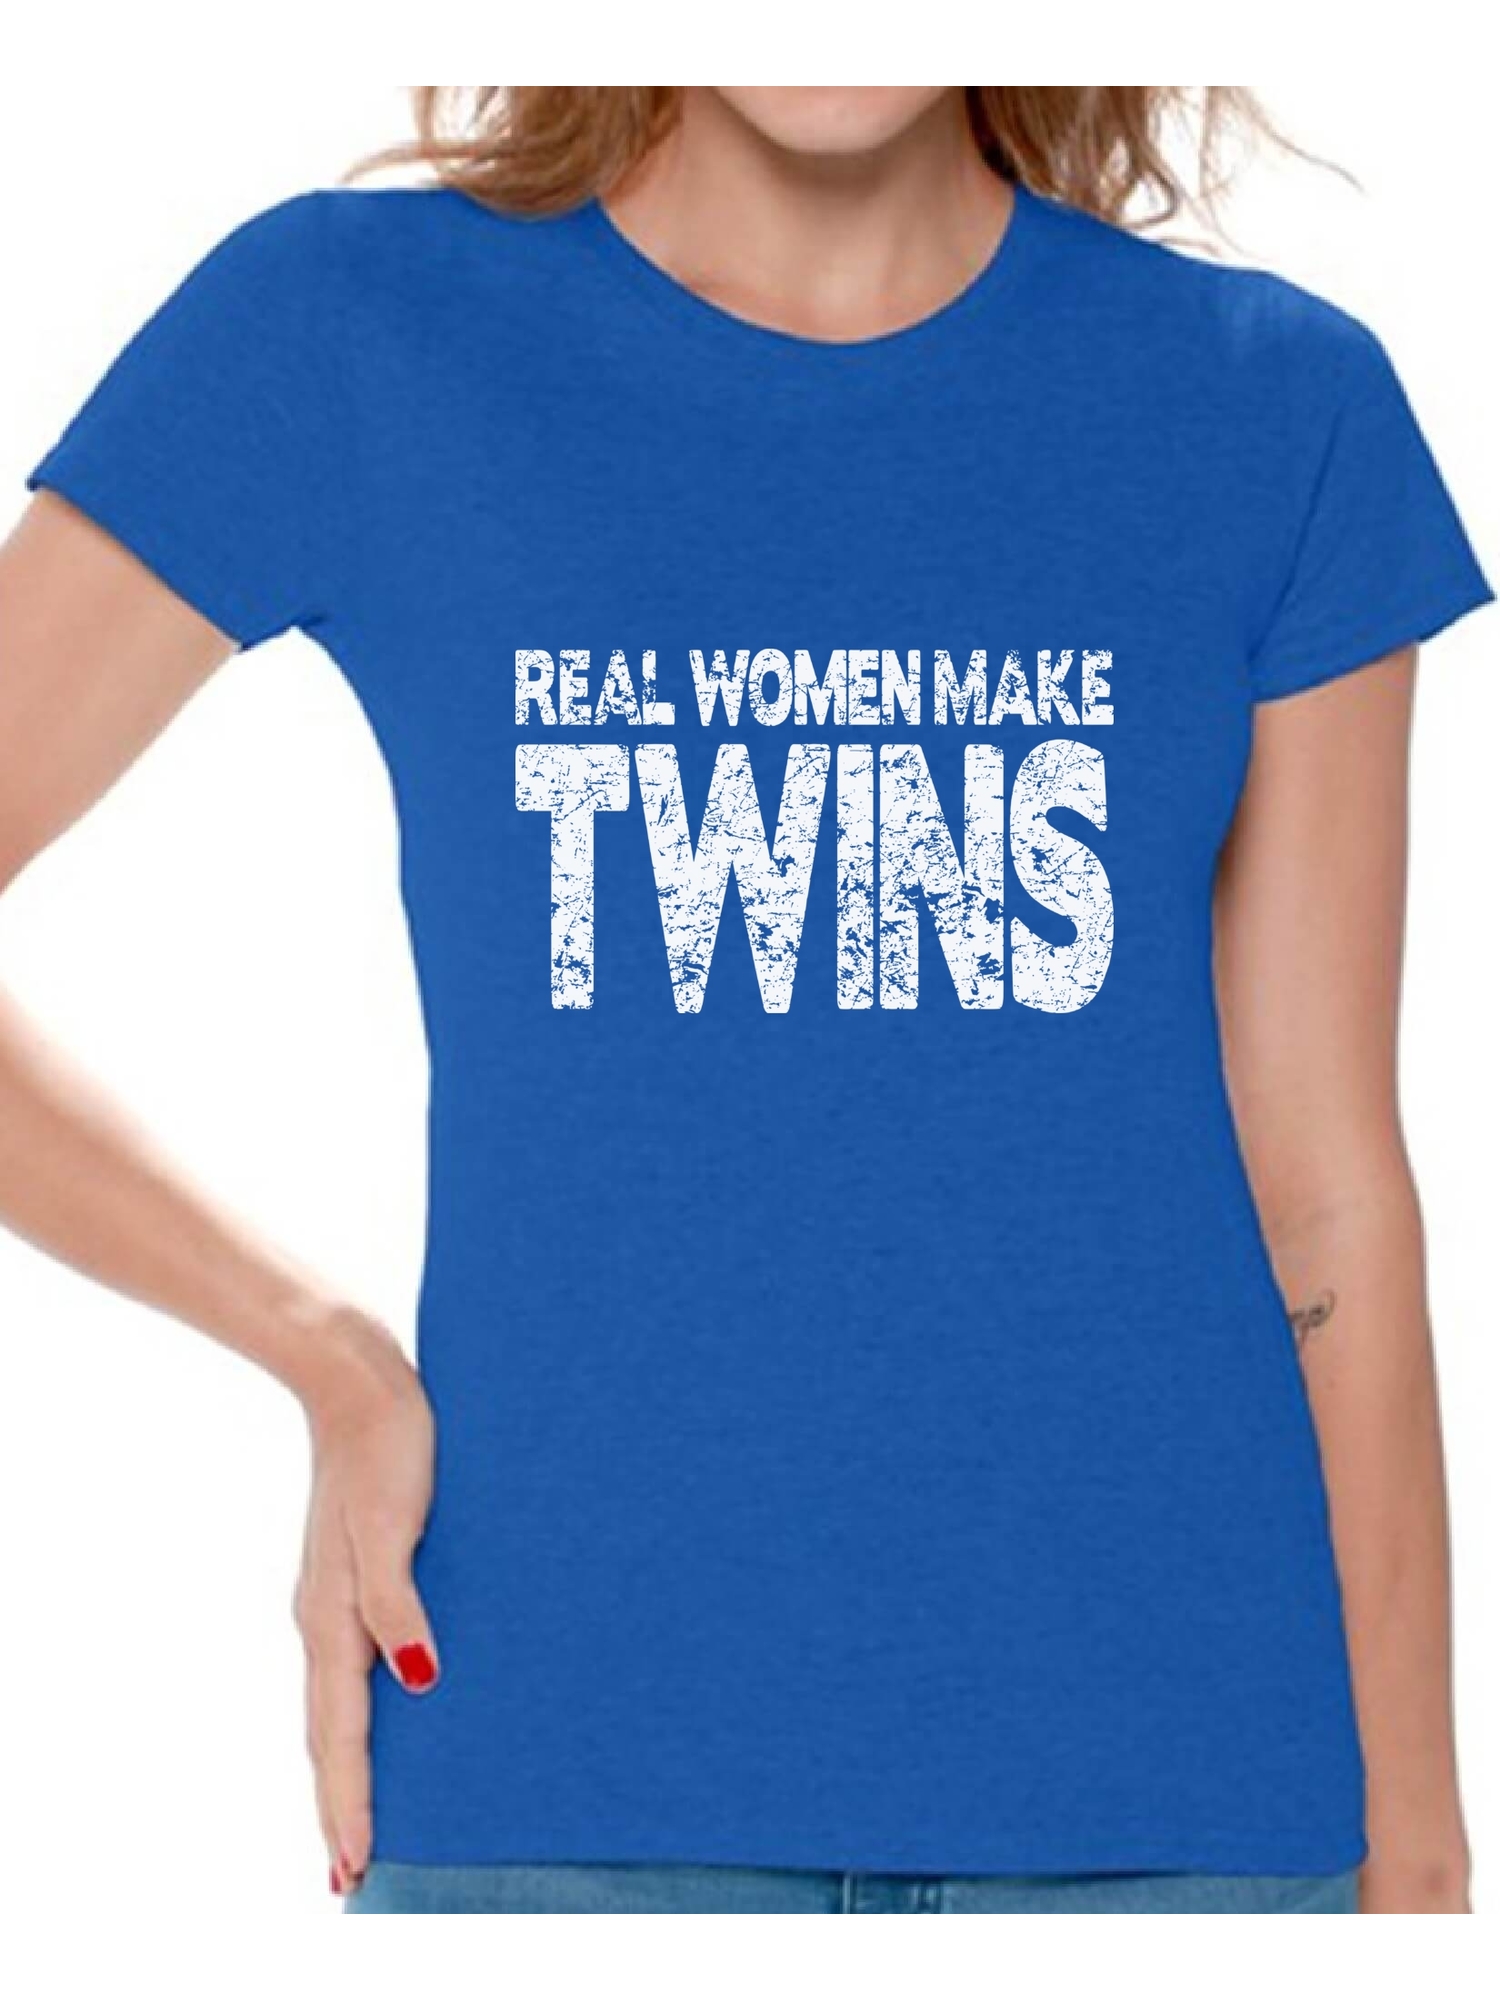 Awkward Styles Women's Real Women Make Twins Graphic T-shirt Tops Mother`s Hilarious - image 1 of 4